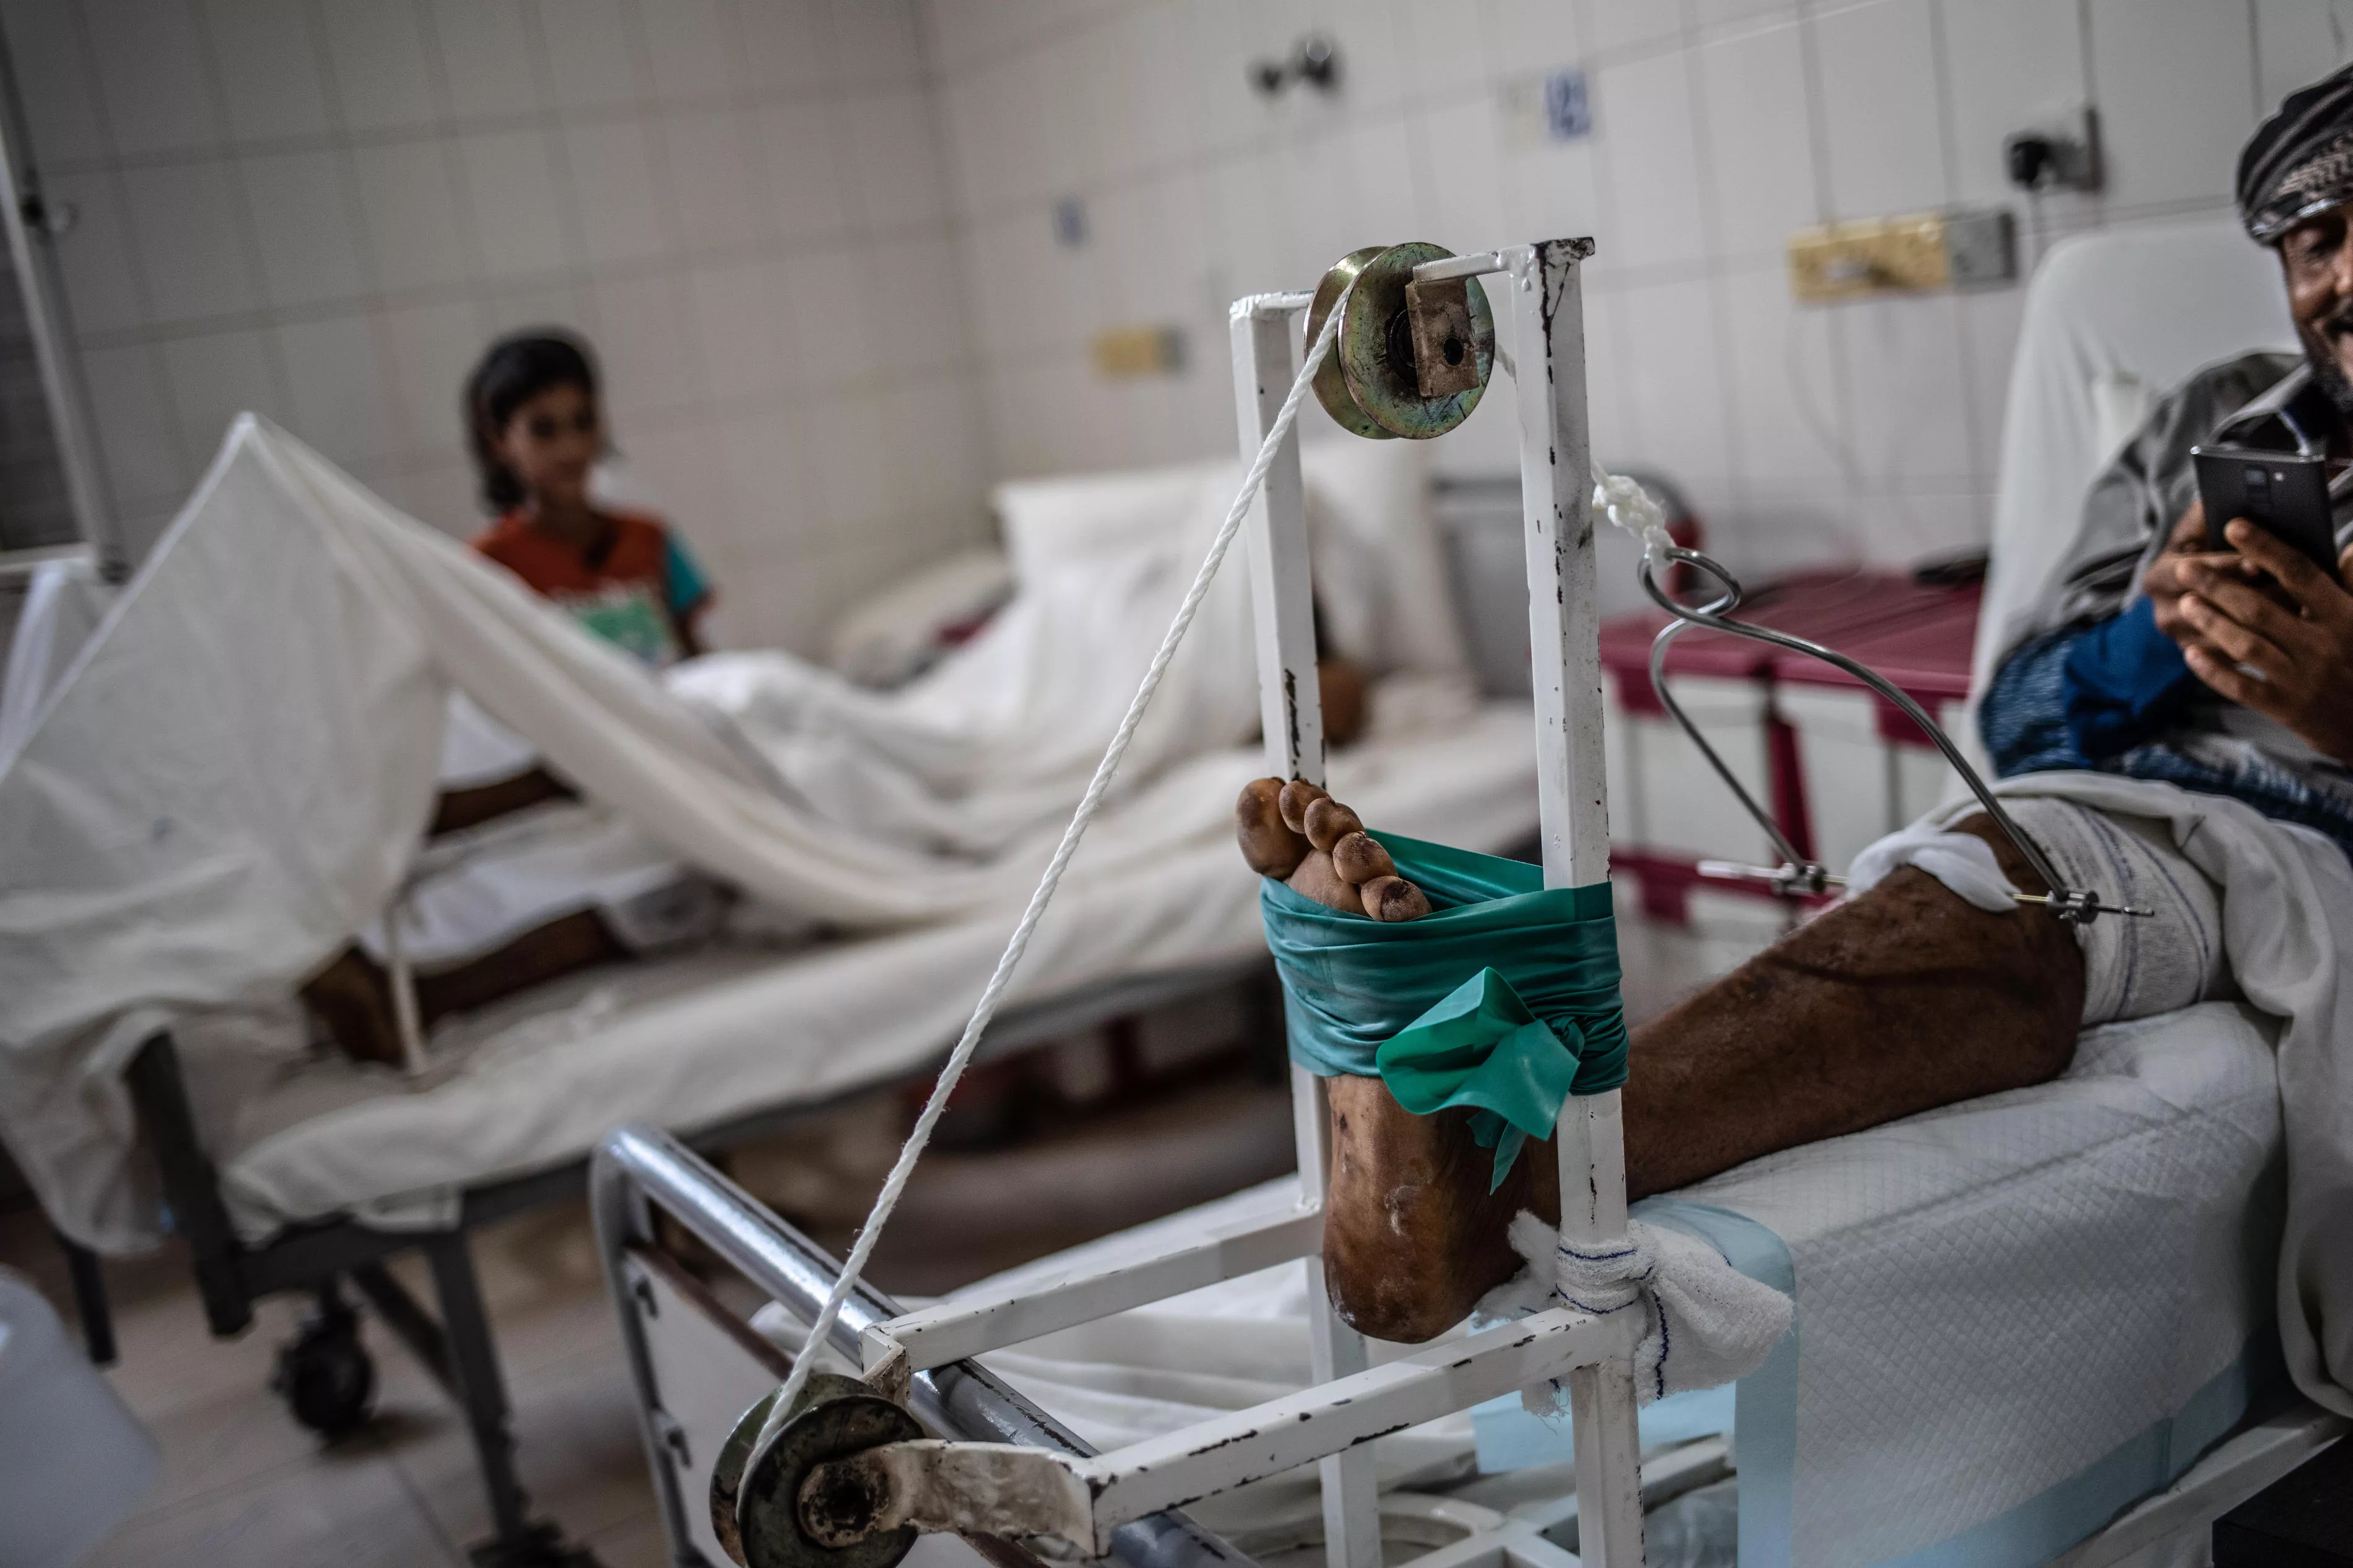 Abdallah is a patient at MSF’s trauma hospital in Aden (Yemen). MSF’s hospital mostly treats war-wounded patients. Abdallah was shot in the leg by a sniper. He eventually arrived at MSF surgical hospital in Mocha 12 hours after being injured.